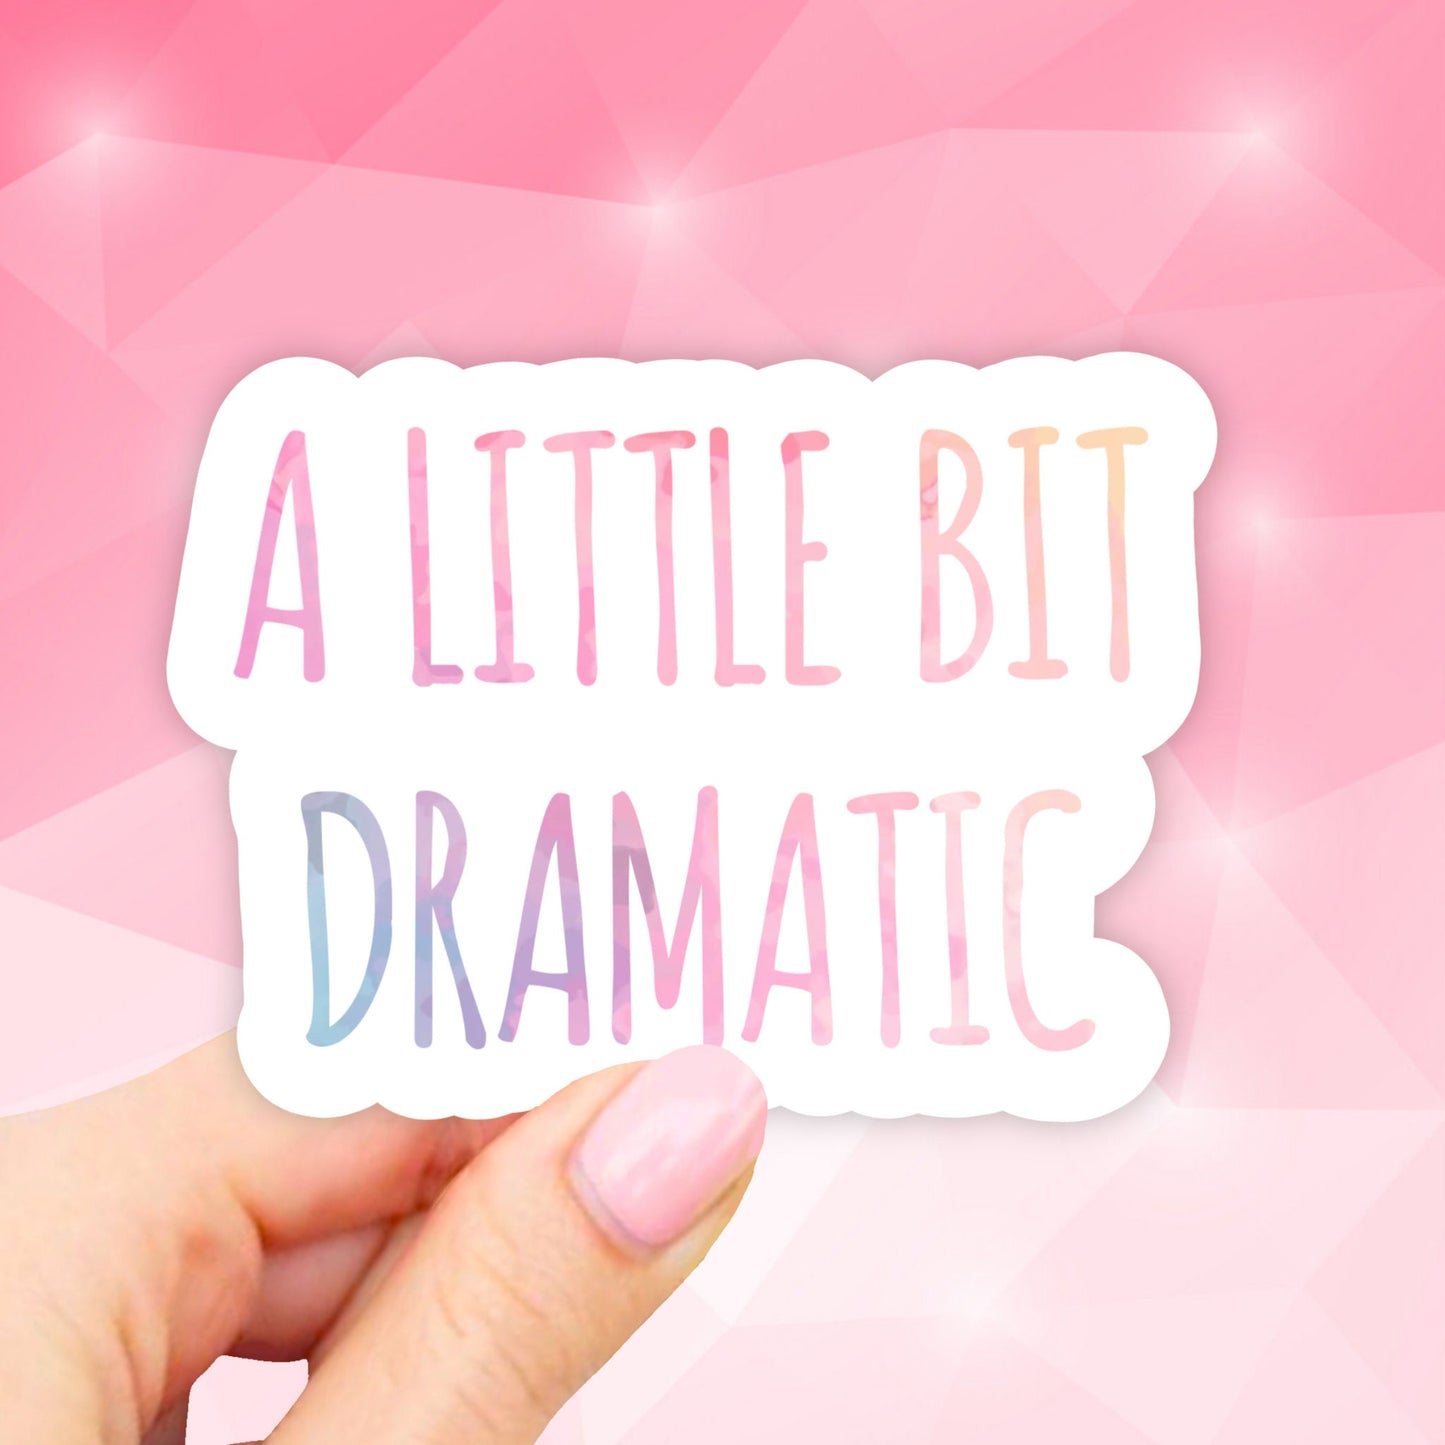 A Little Bit Dramatic Sticker, Waterbottle stickers, Laptop Stickers, Aesthetic Stickers, Vinyl Stickers, Computer Decal, Sassy Stickers